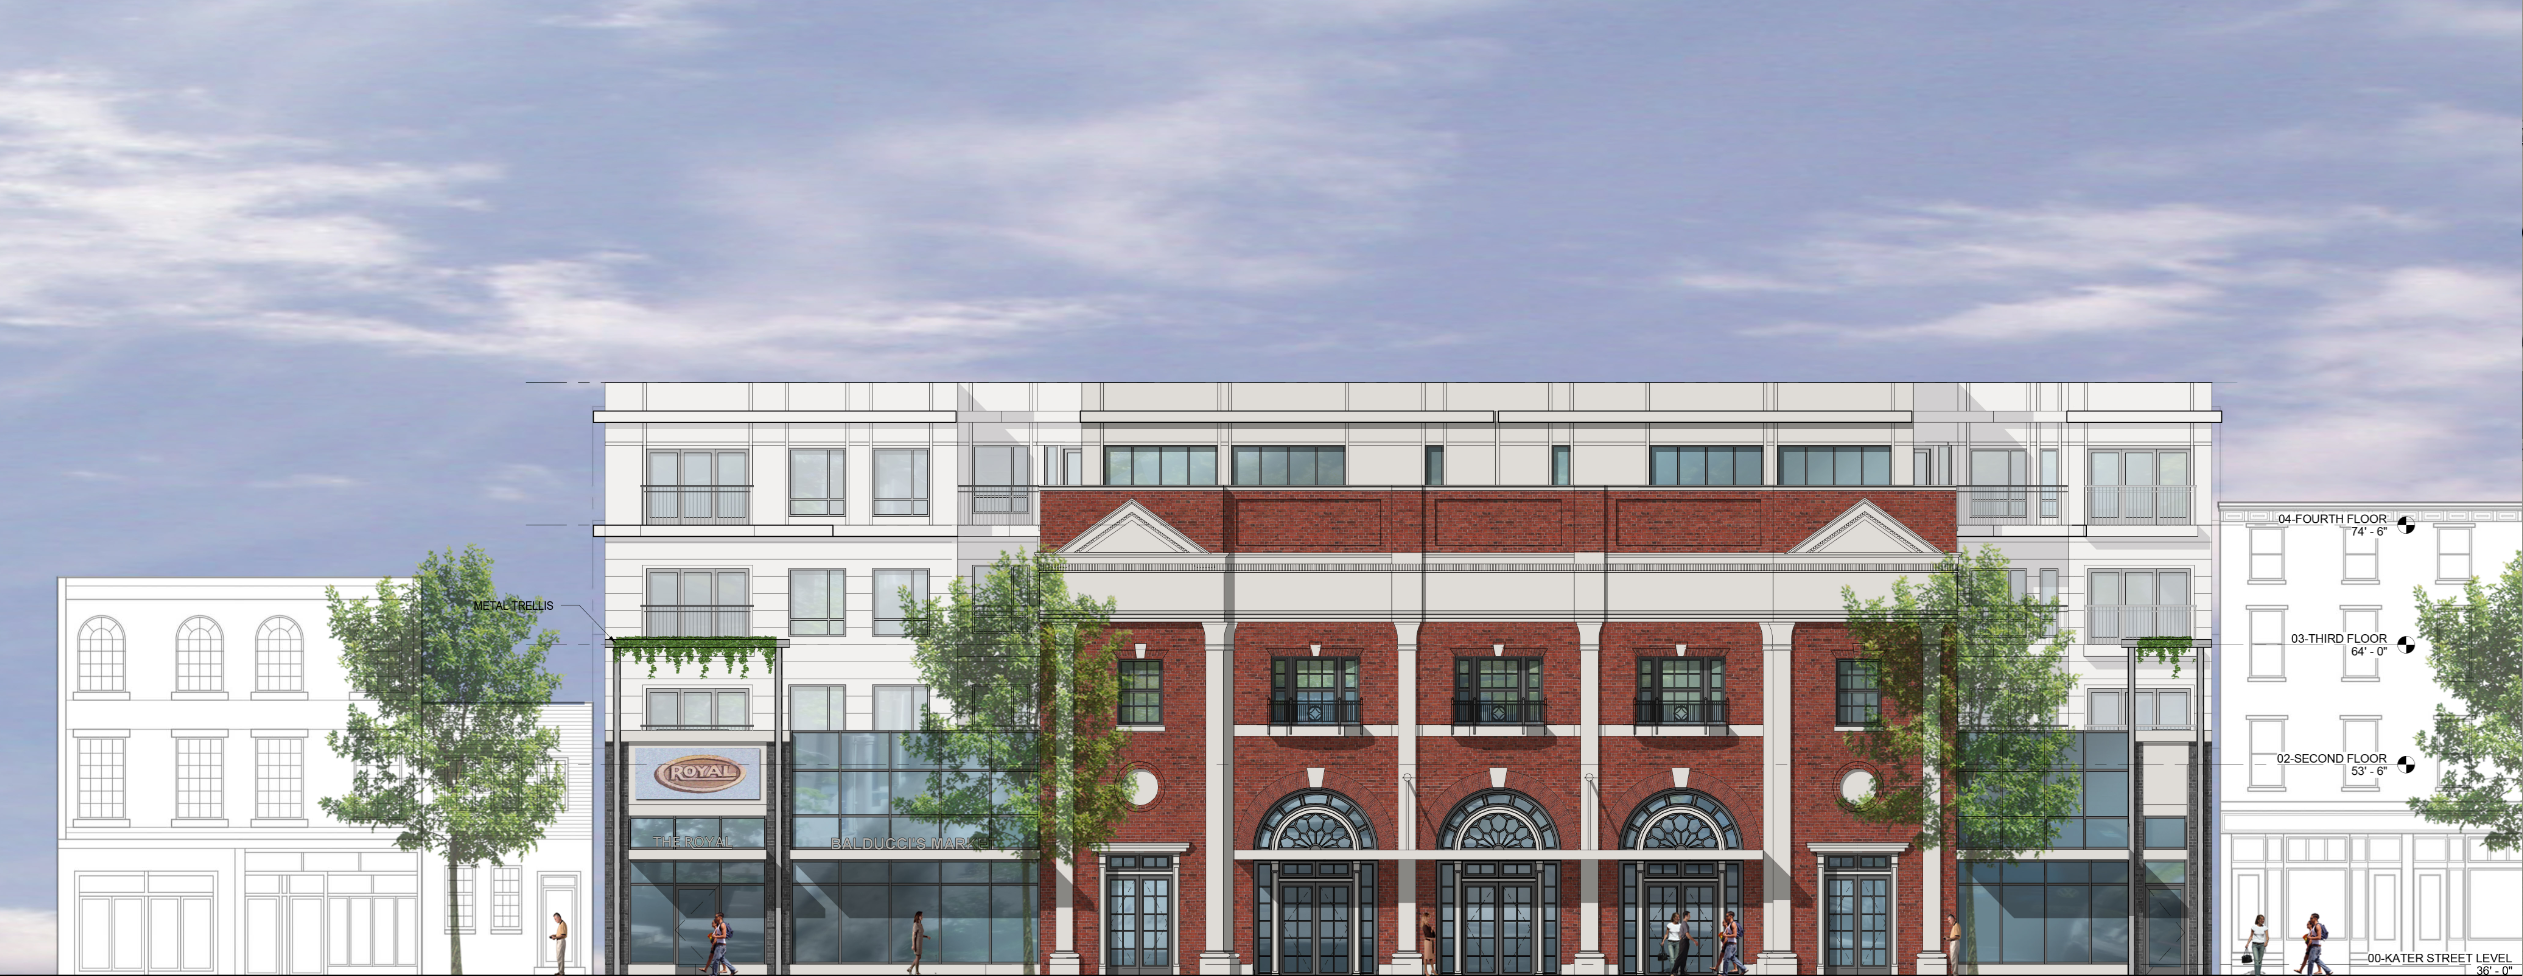 Proposed elevation of Royal Theater's historic South Street facade incorporated into a new building | J Davis Architects